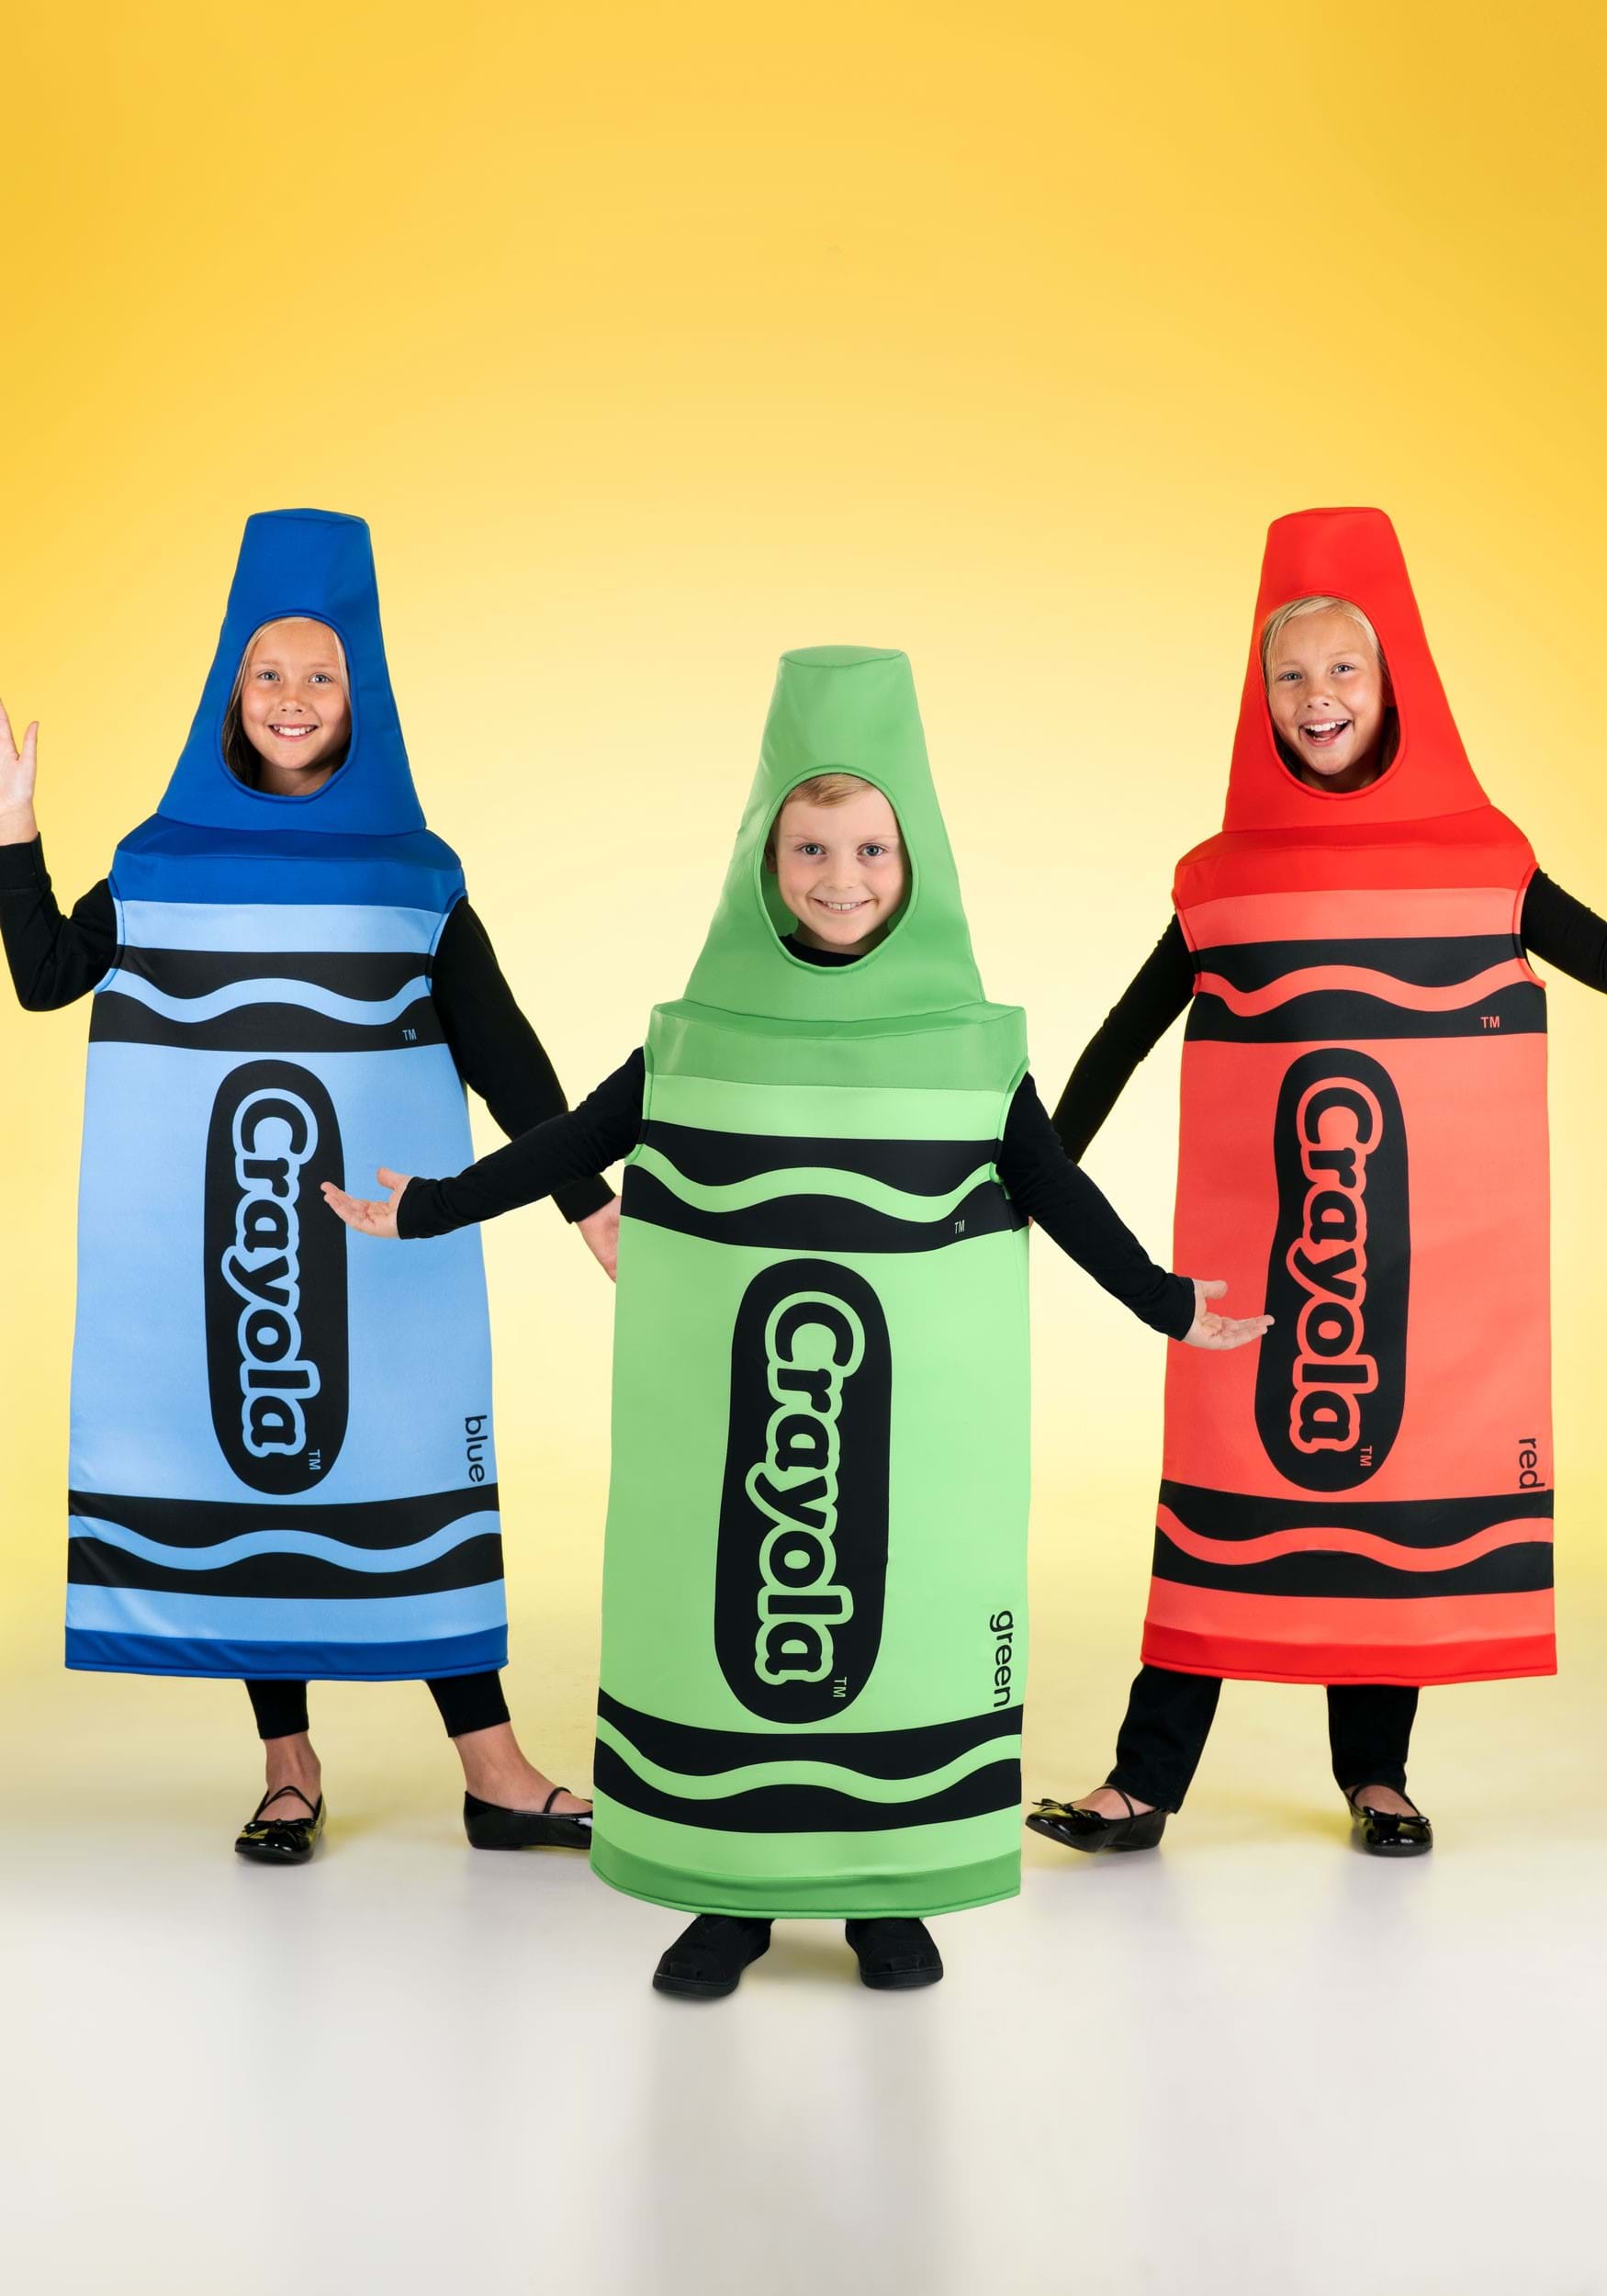 Red Crayola Crayon Costume For Kid's